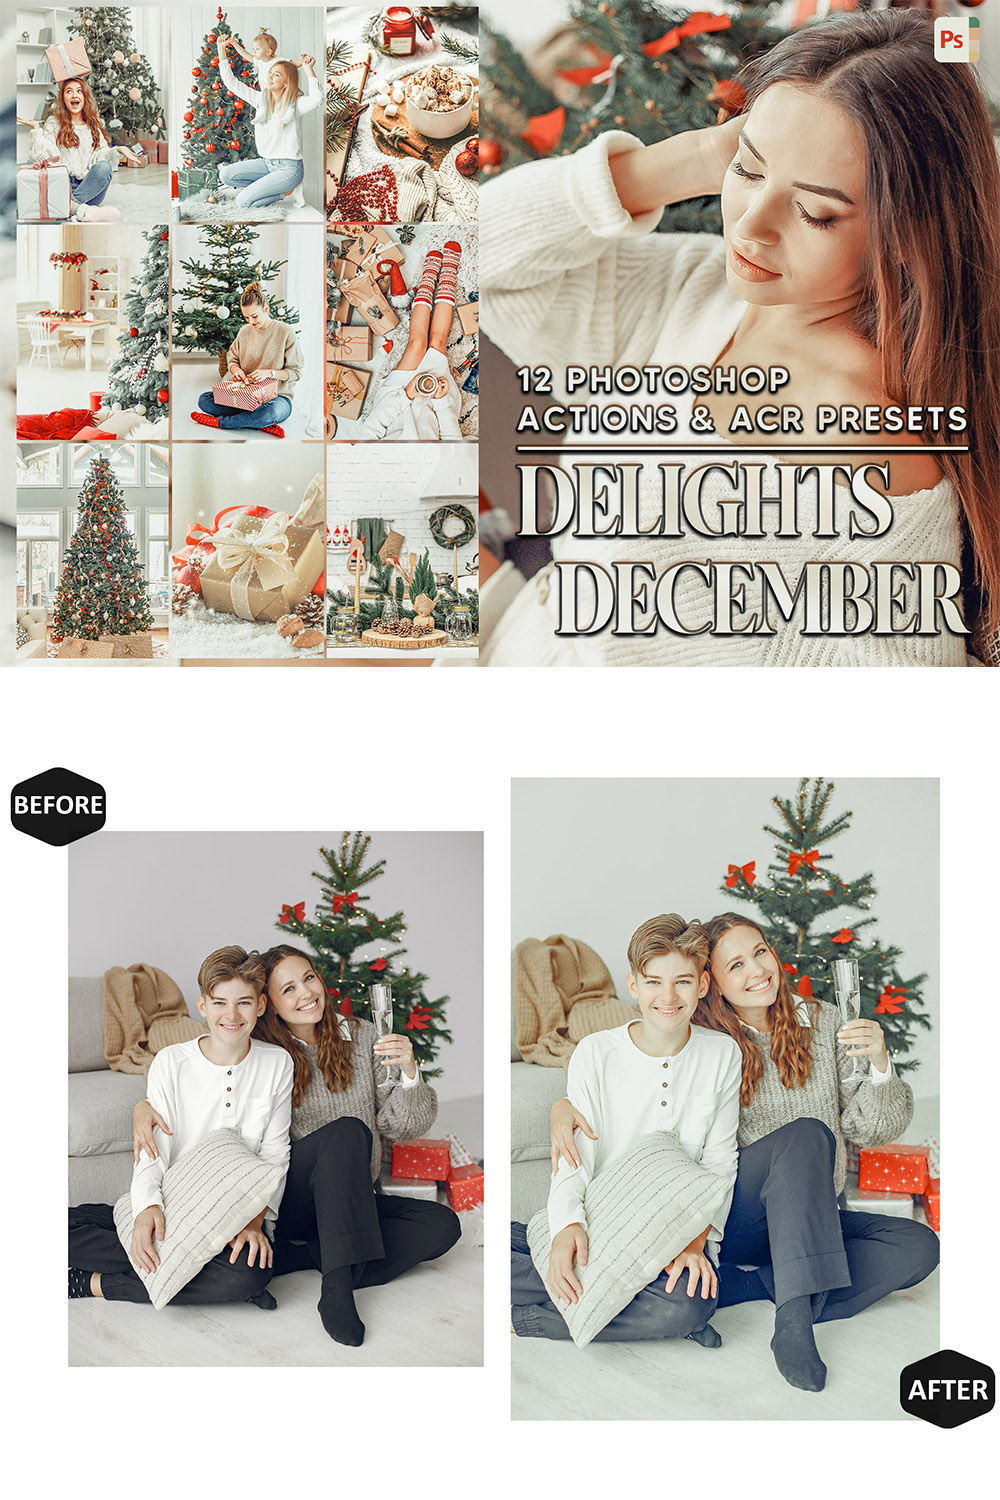 12 Photoshop Actions, Delights December Ps Action, Christmas ACR Preset, White Ps Filter, Atn Portrait And Lifestyle Theme For Instagram, Blogger pinterest preview image.